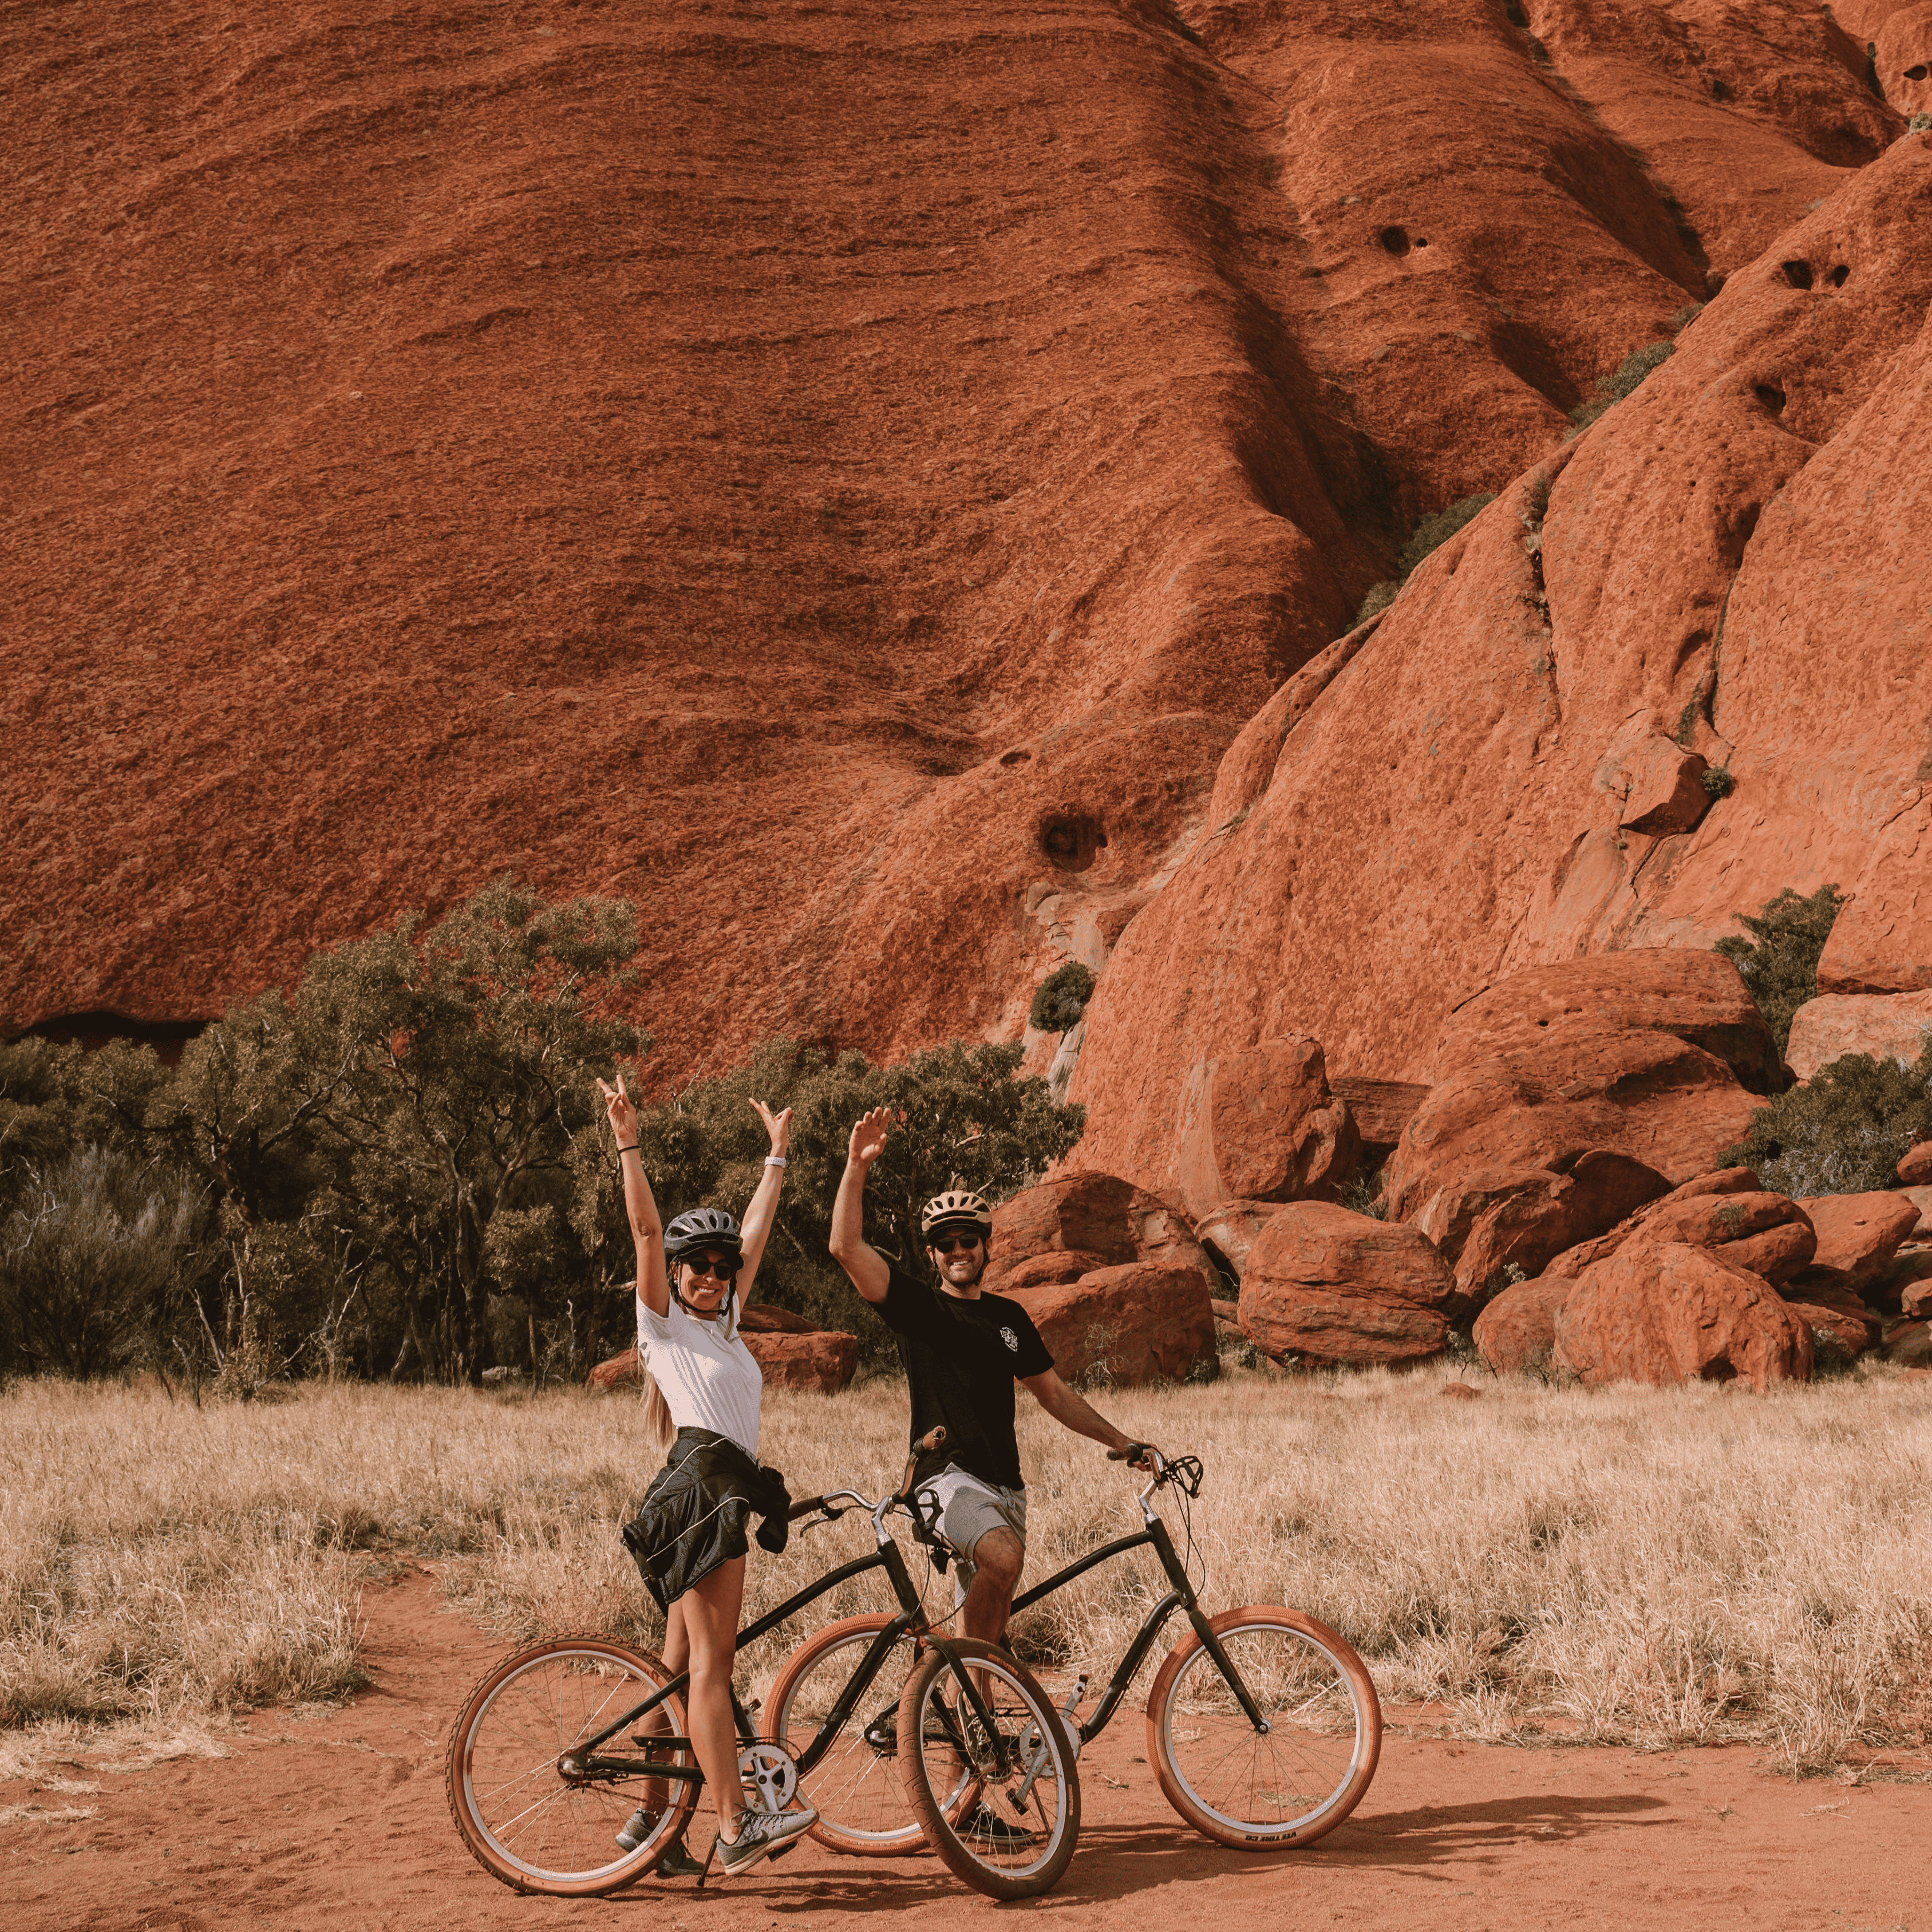 Wade and Dani with their hands up and on top of a bike in front of Uluru